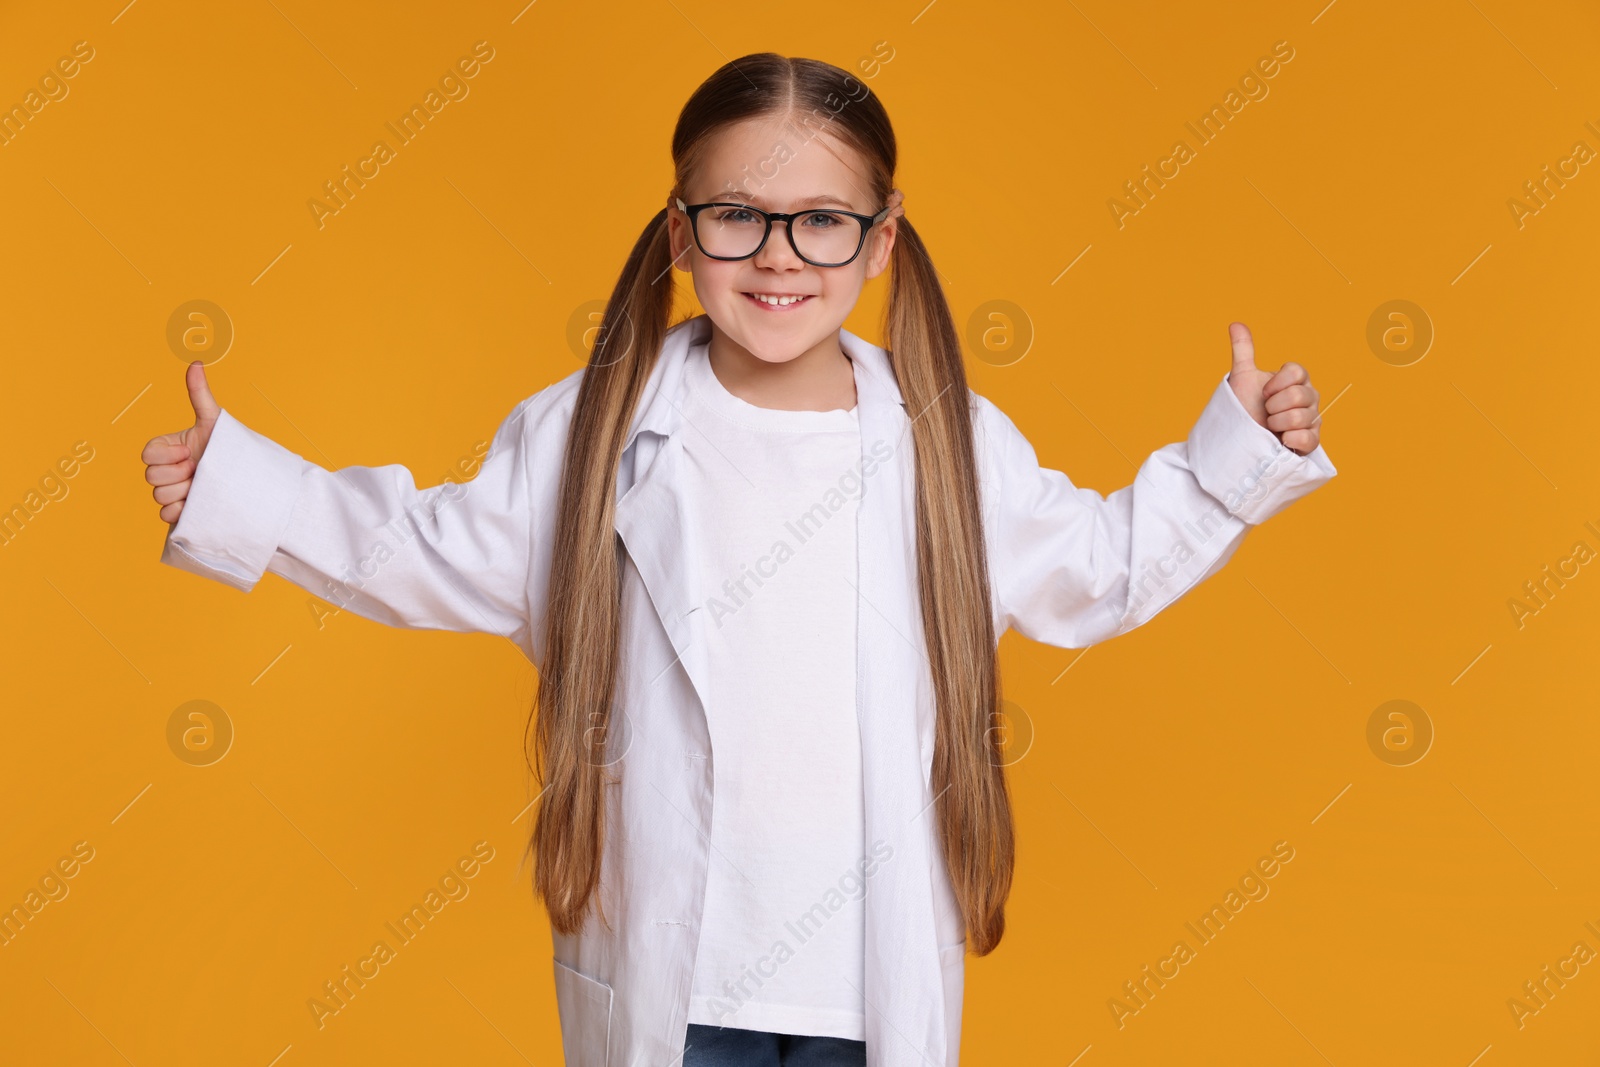 Photo of Little girl in medical uniform showing thumbs up on yellow background